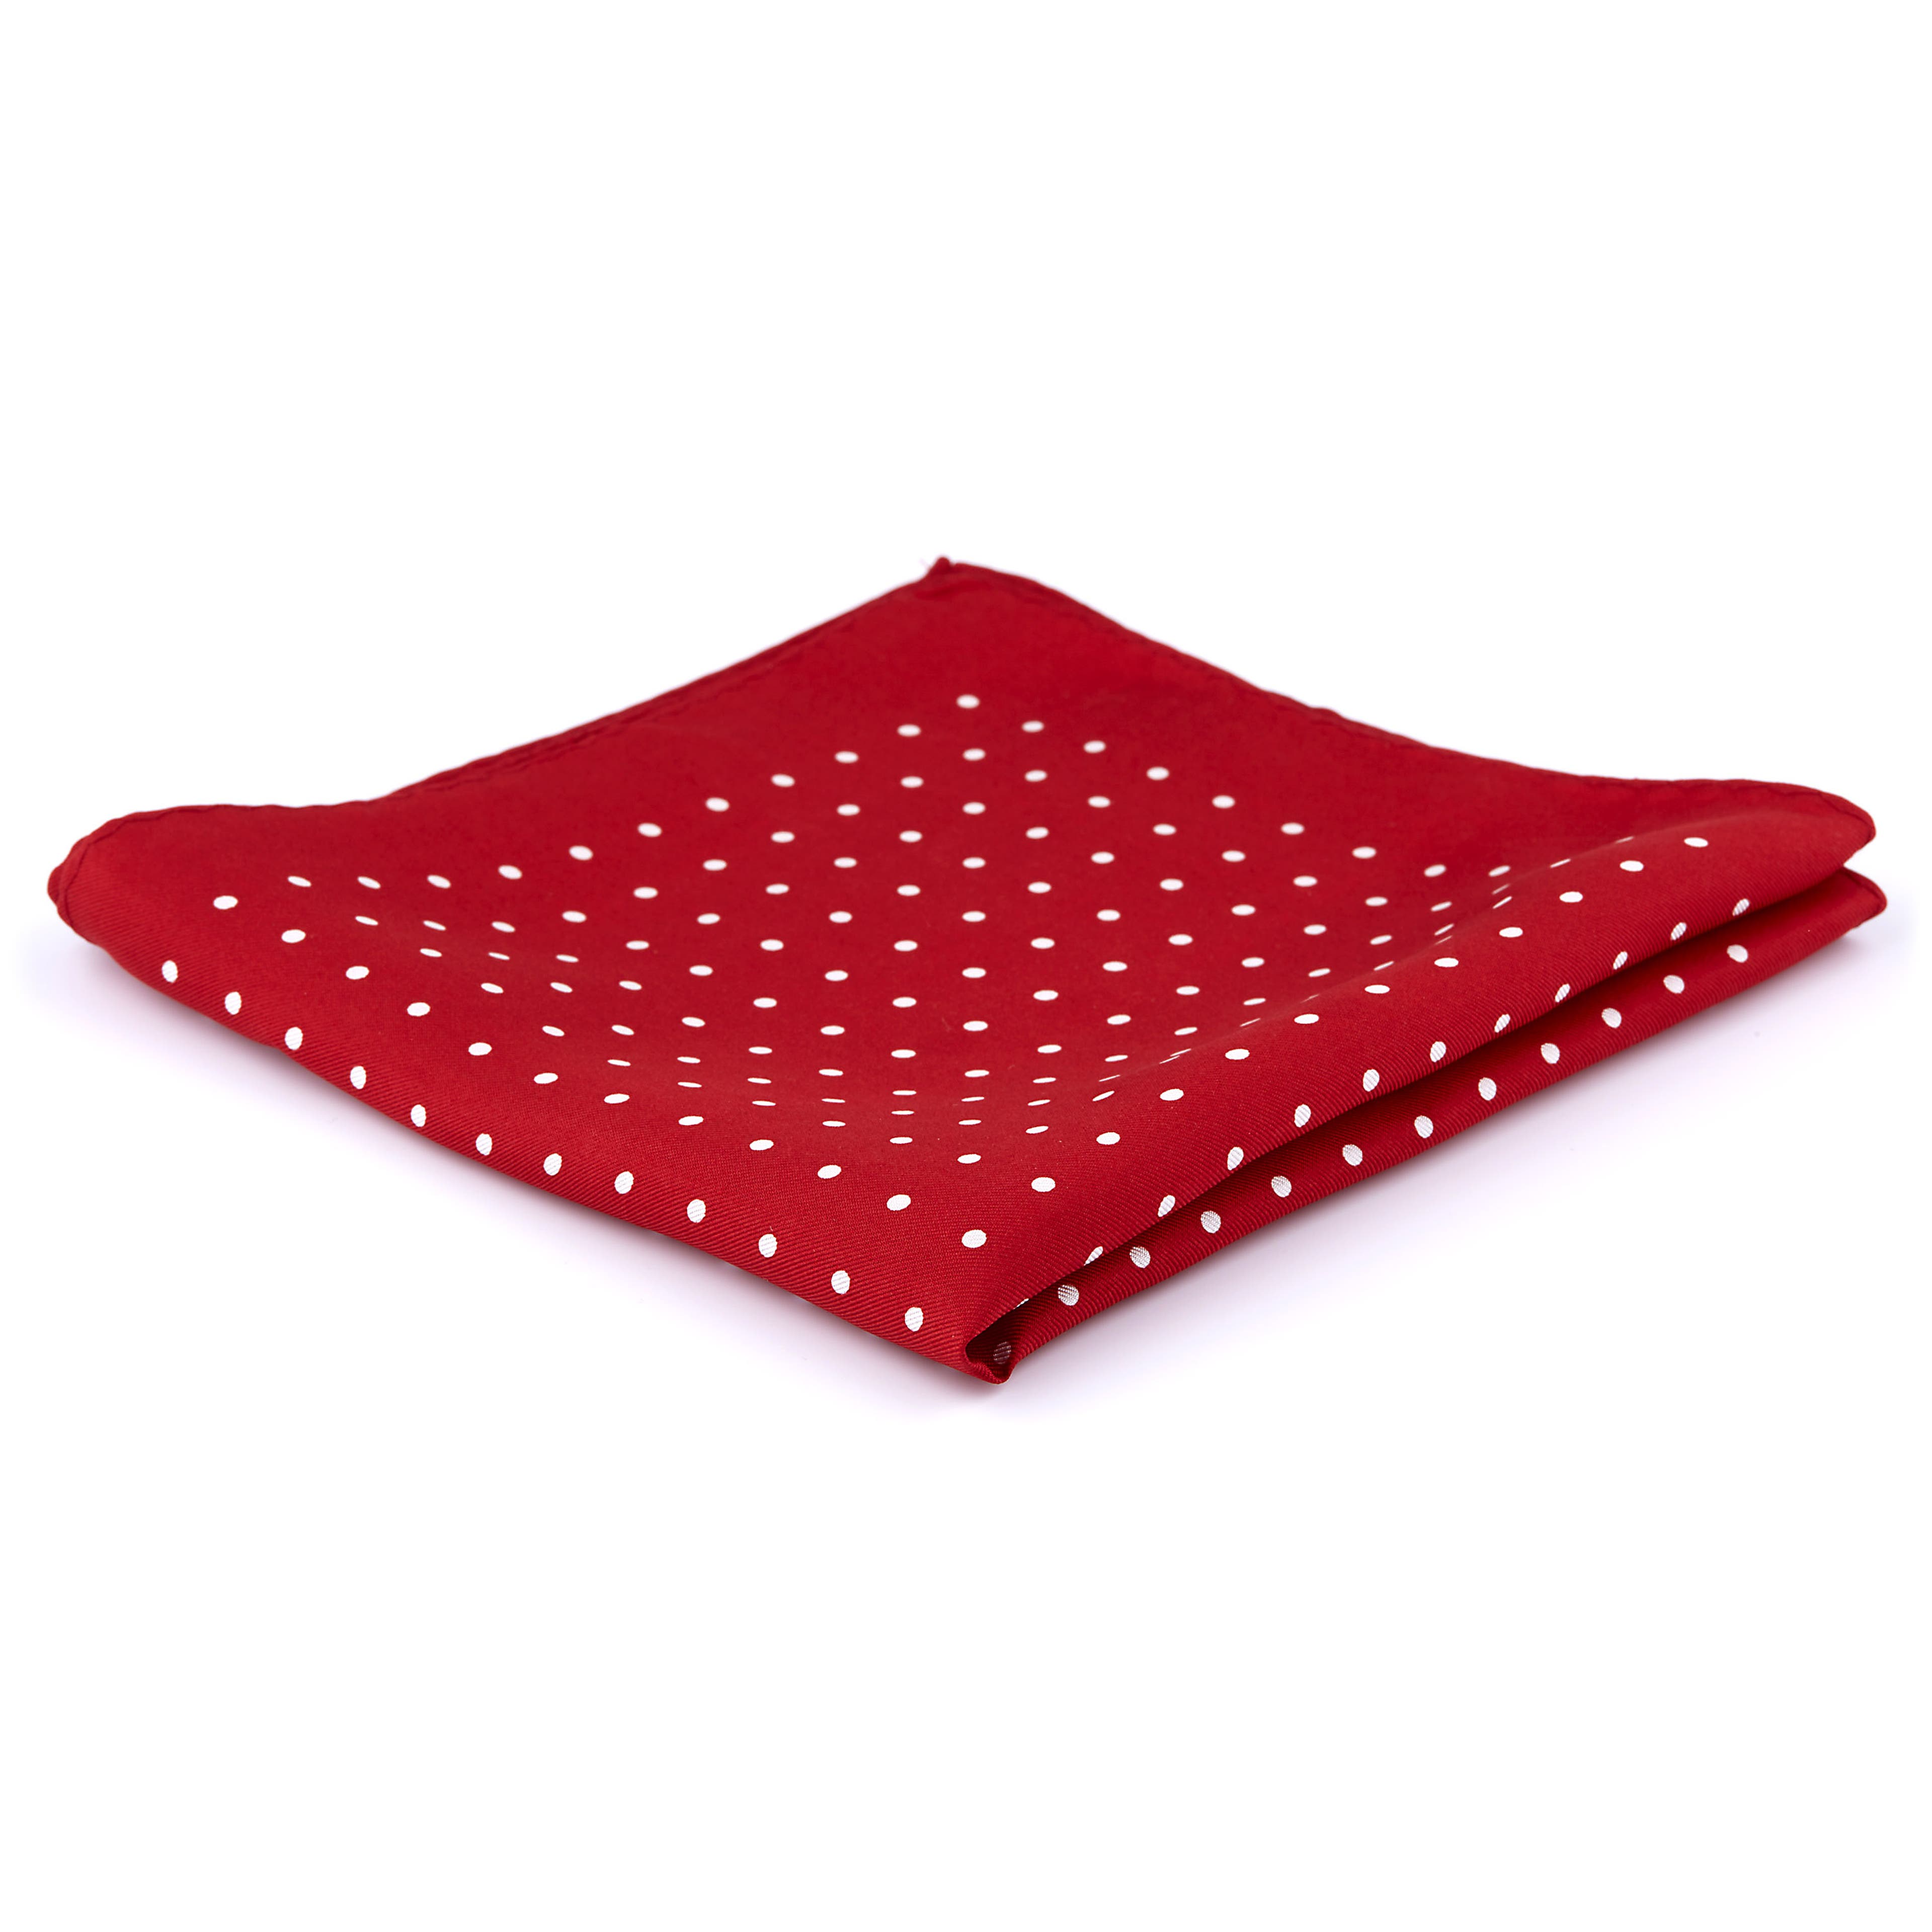 Red Dotted Silk Pocket Square